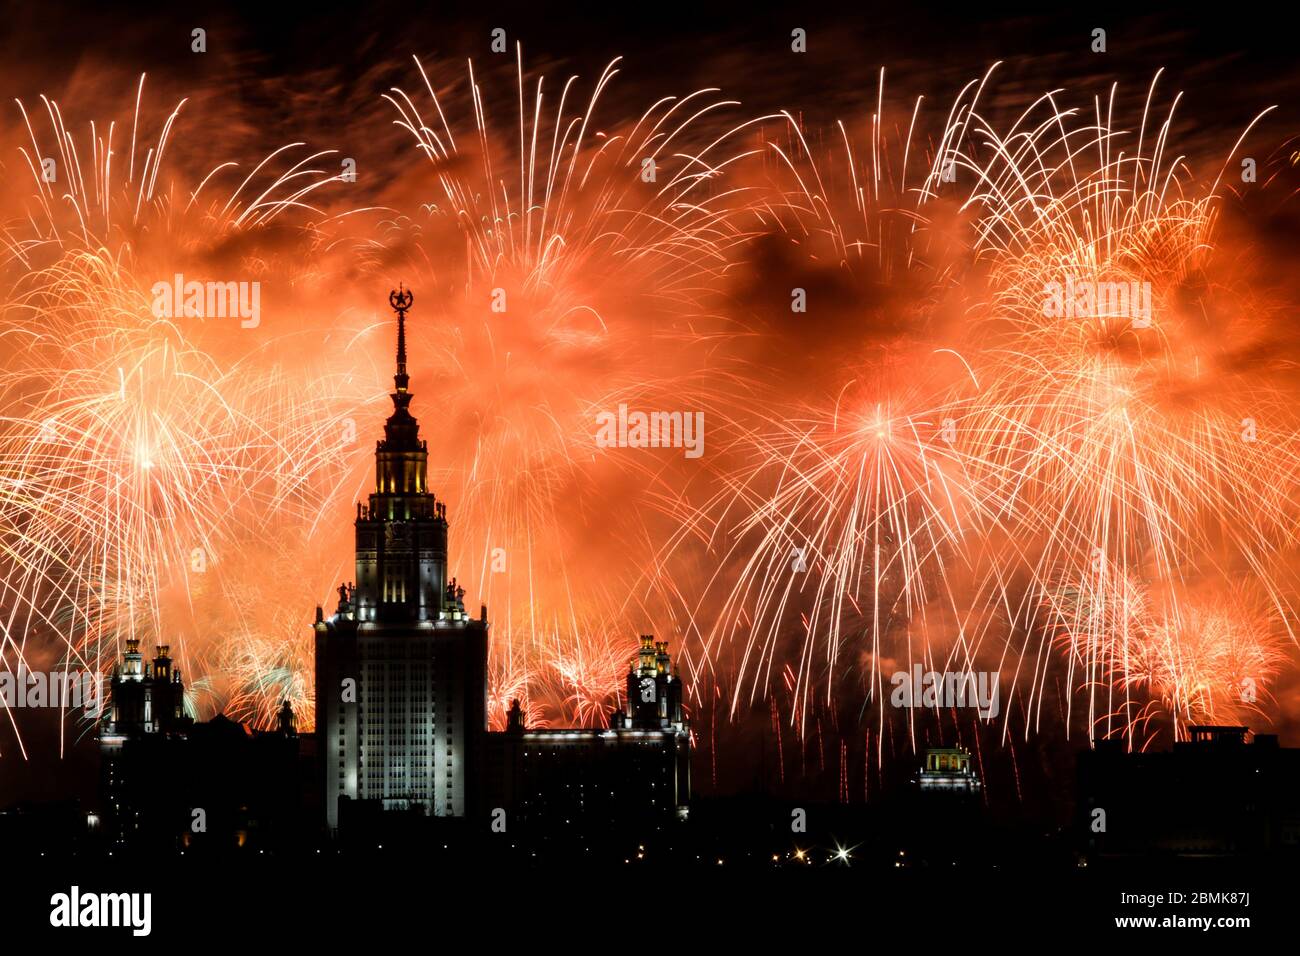 Fireworks explode behind the Moscow State University main building ...